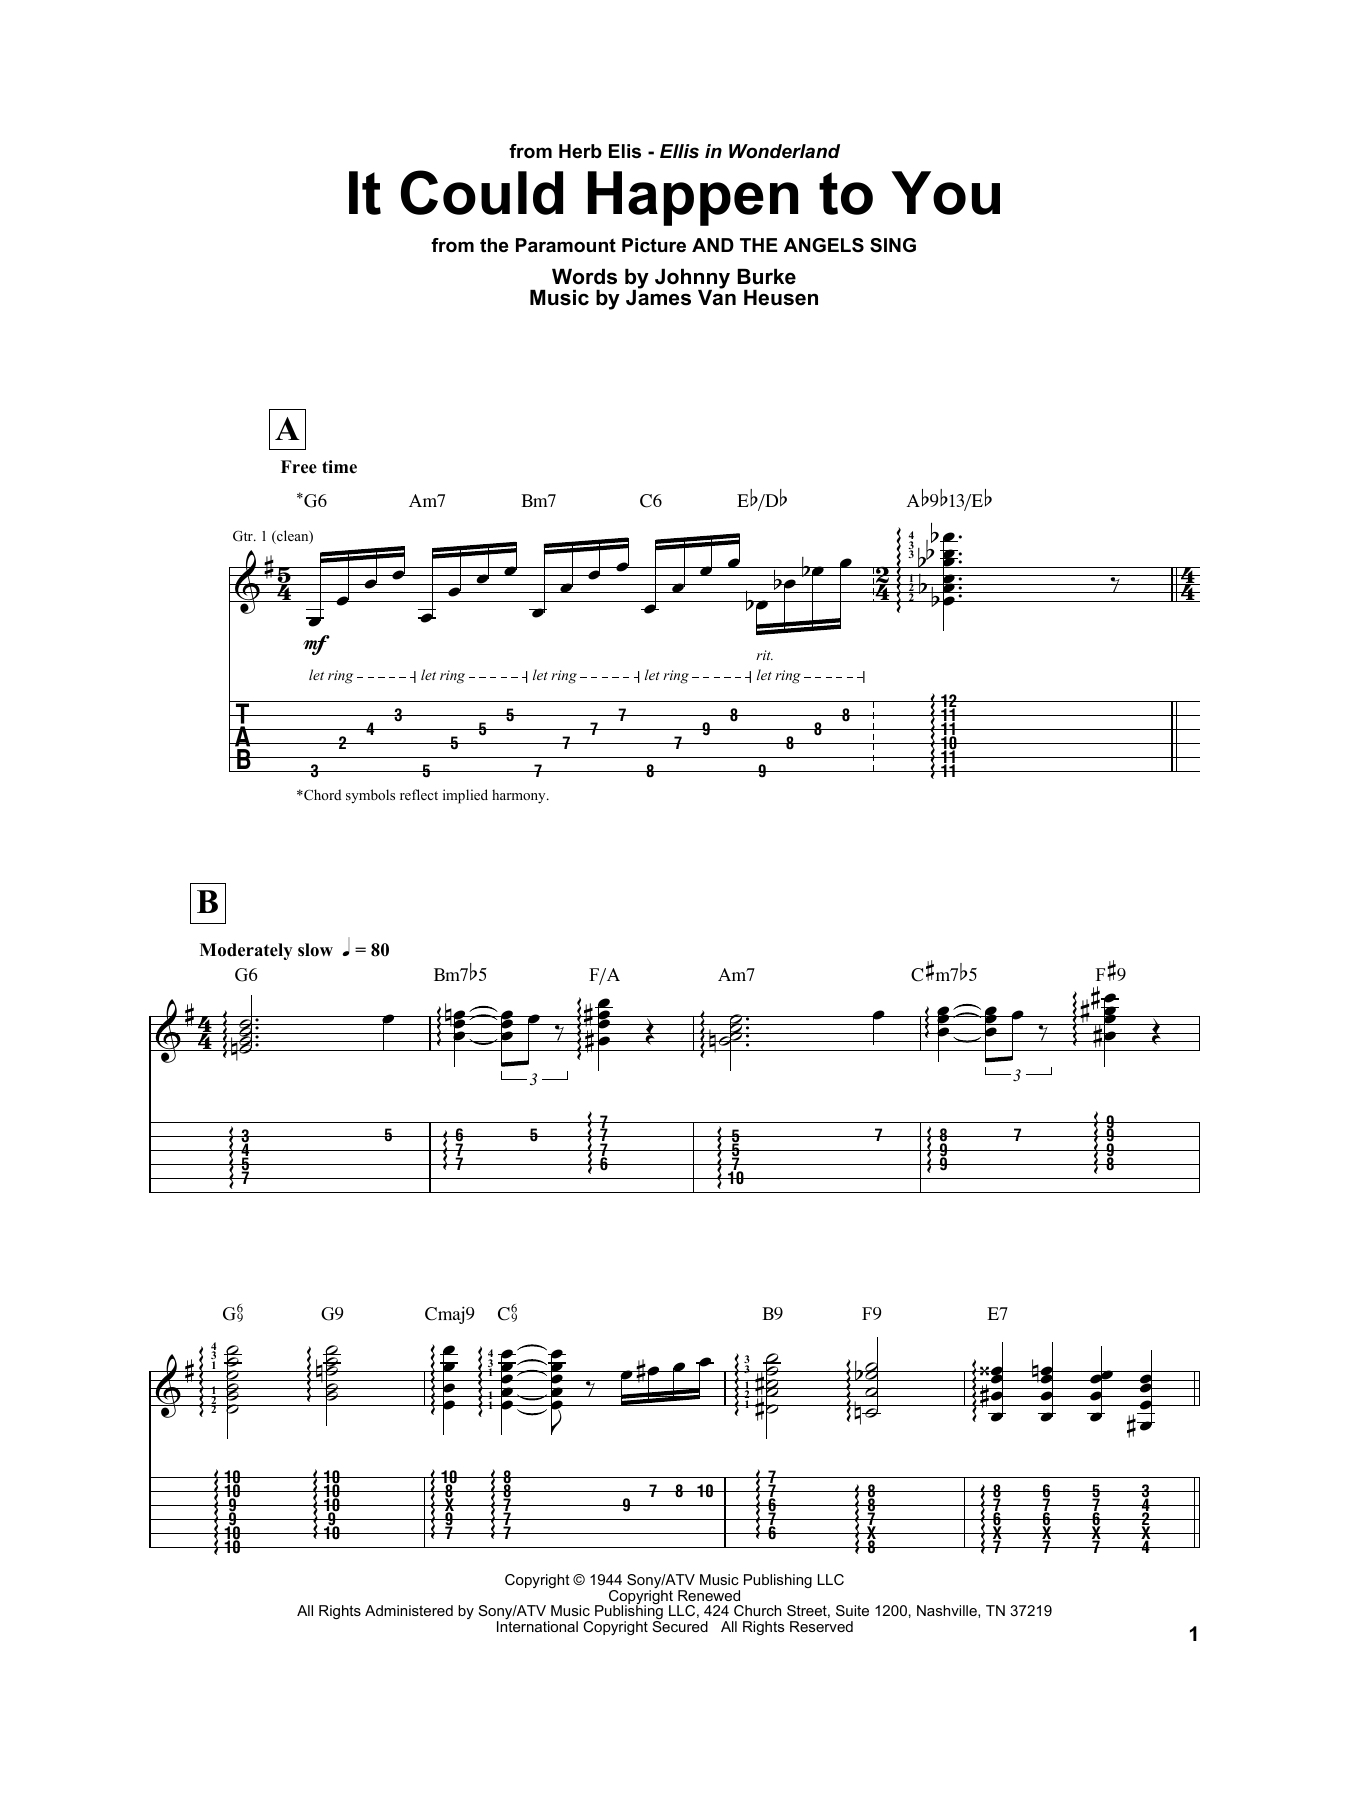 Download Herb Ellis It Could Happen To You Sheet Music